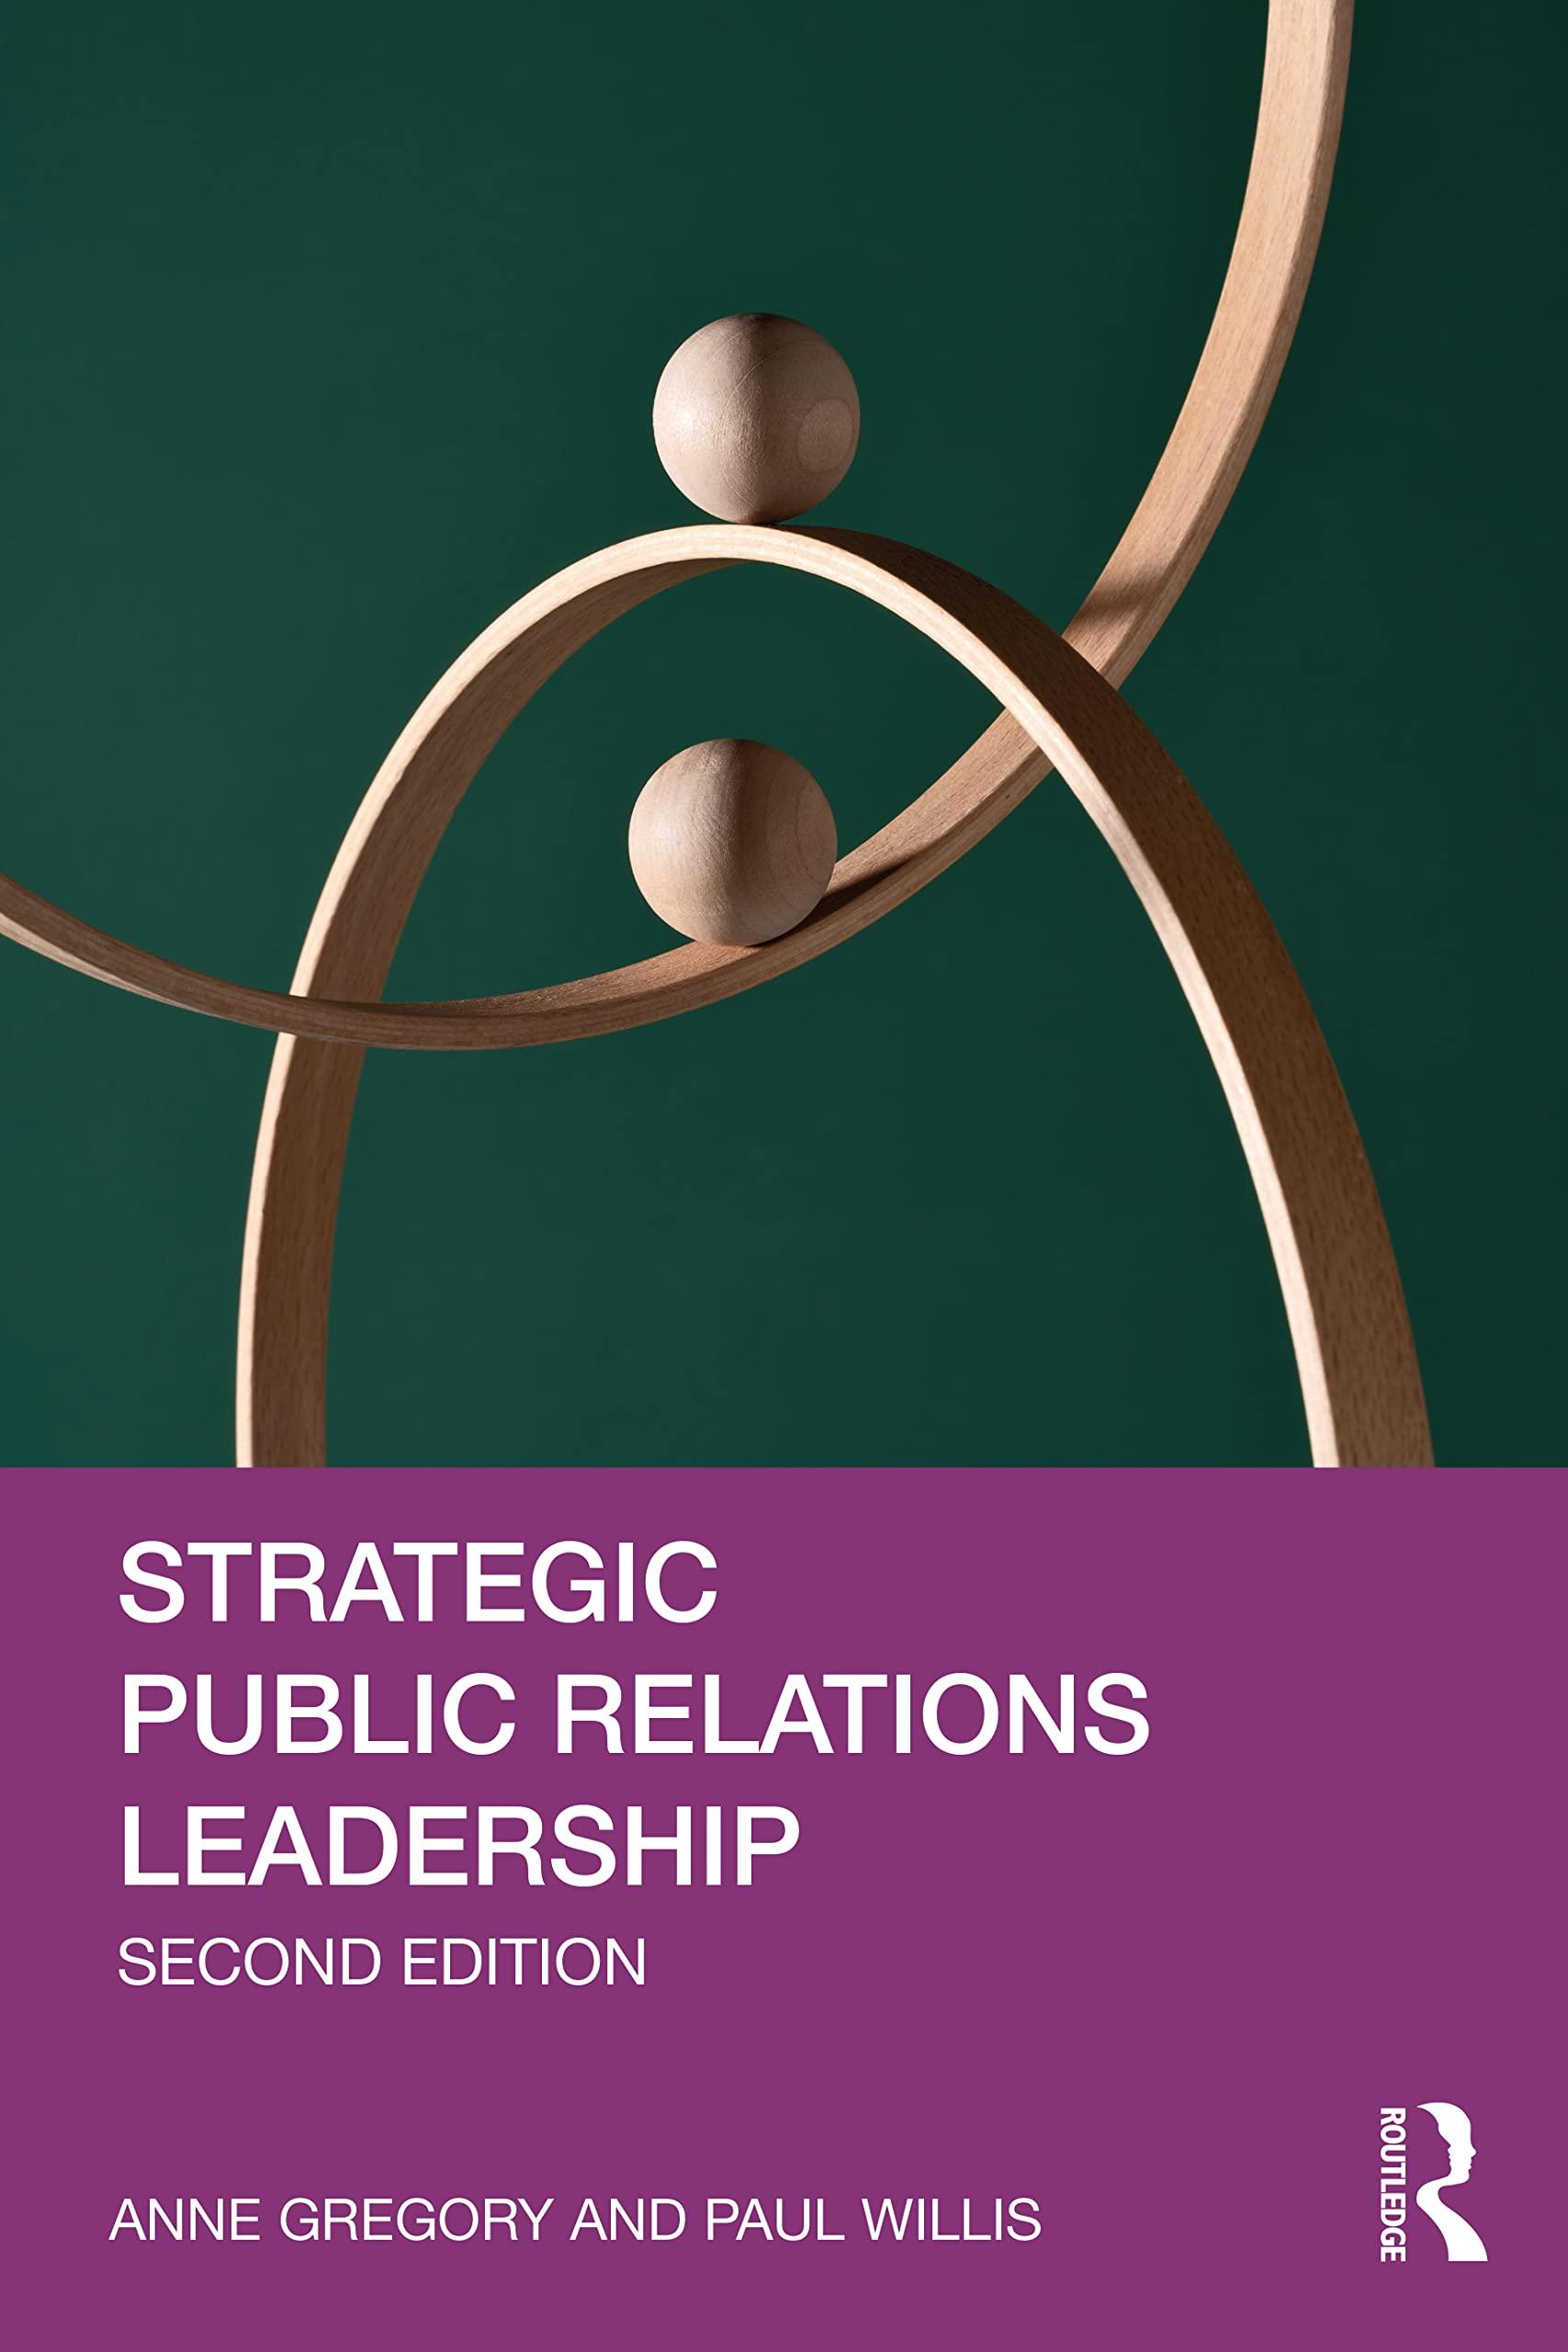 strategic public relations leadership 2nd edition anne gregory, paul willis 1032028017, 978-1032028019